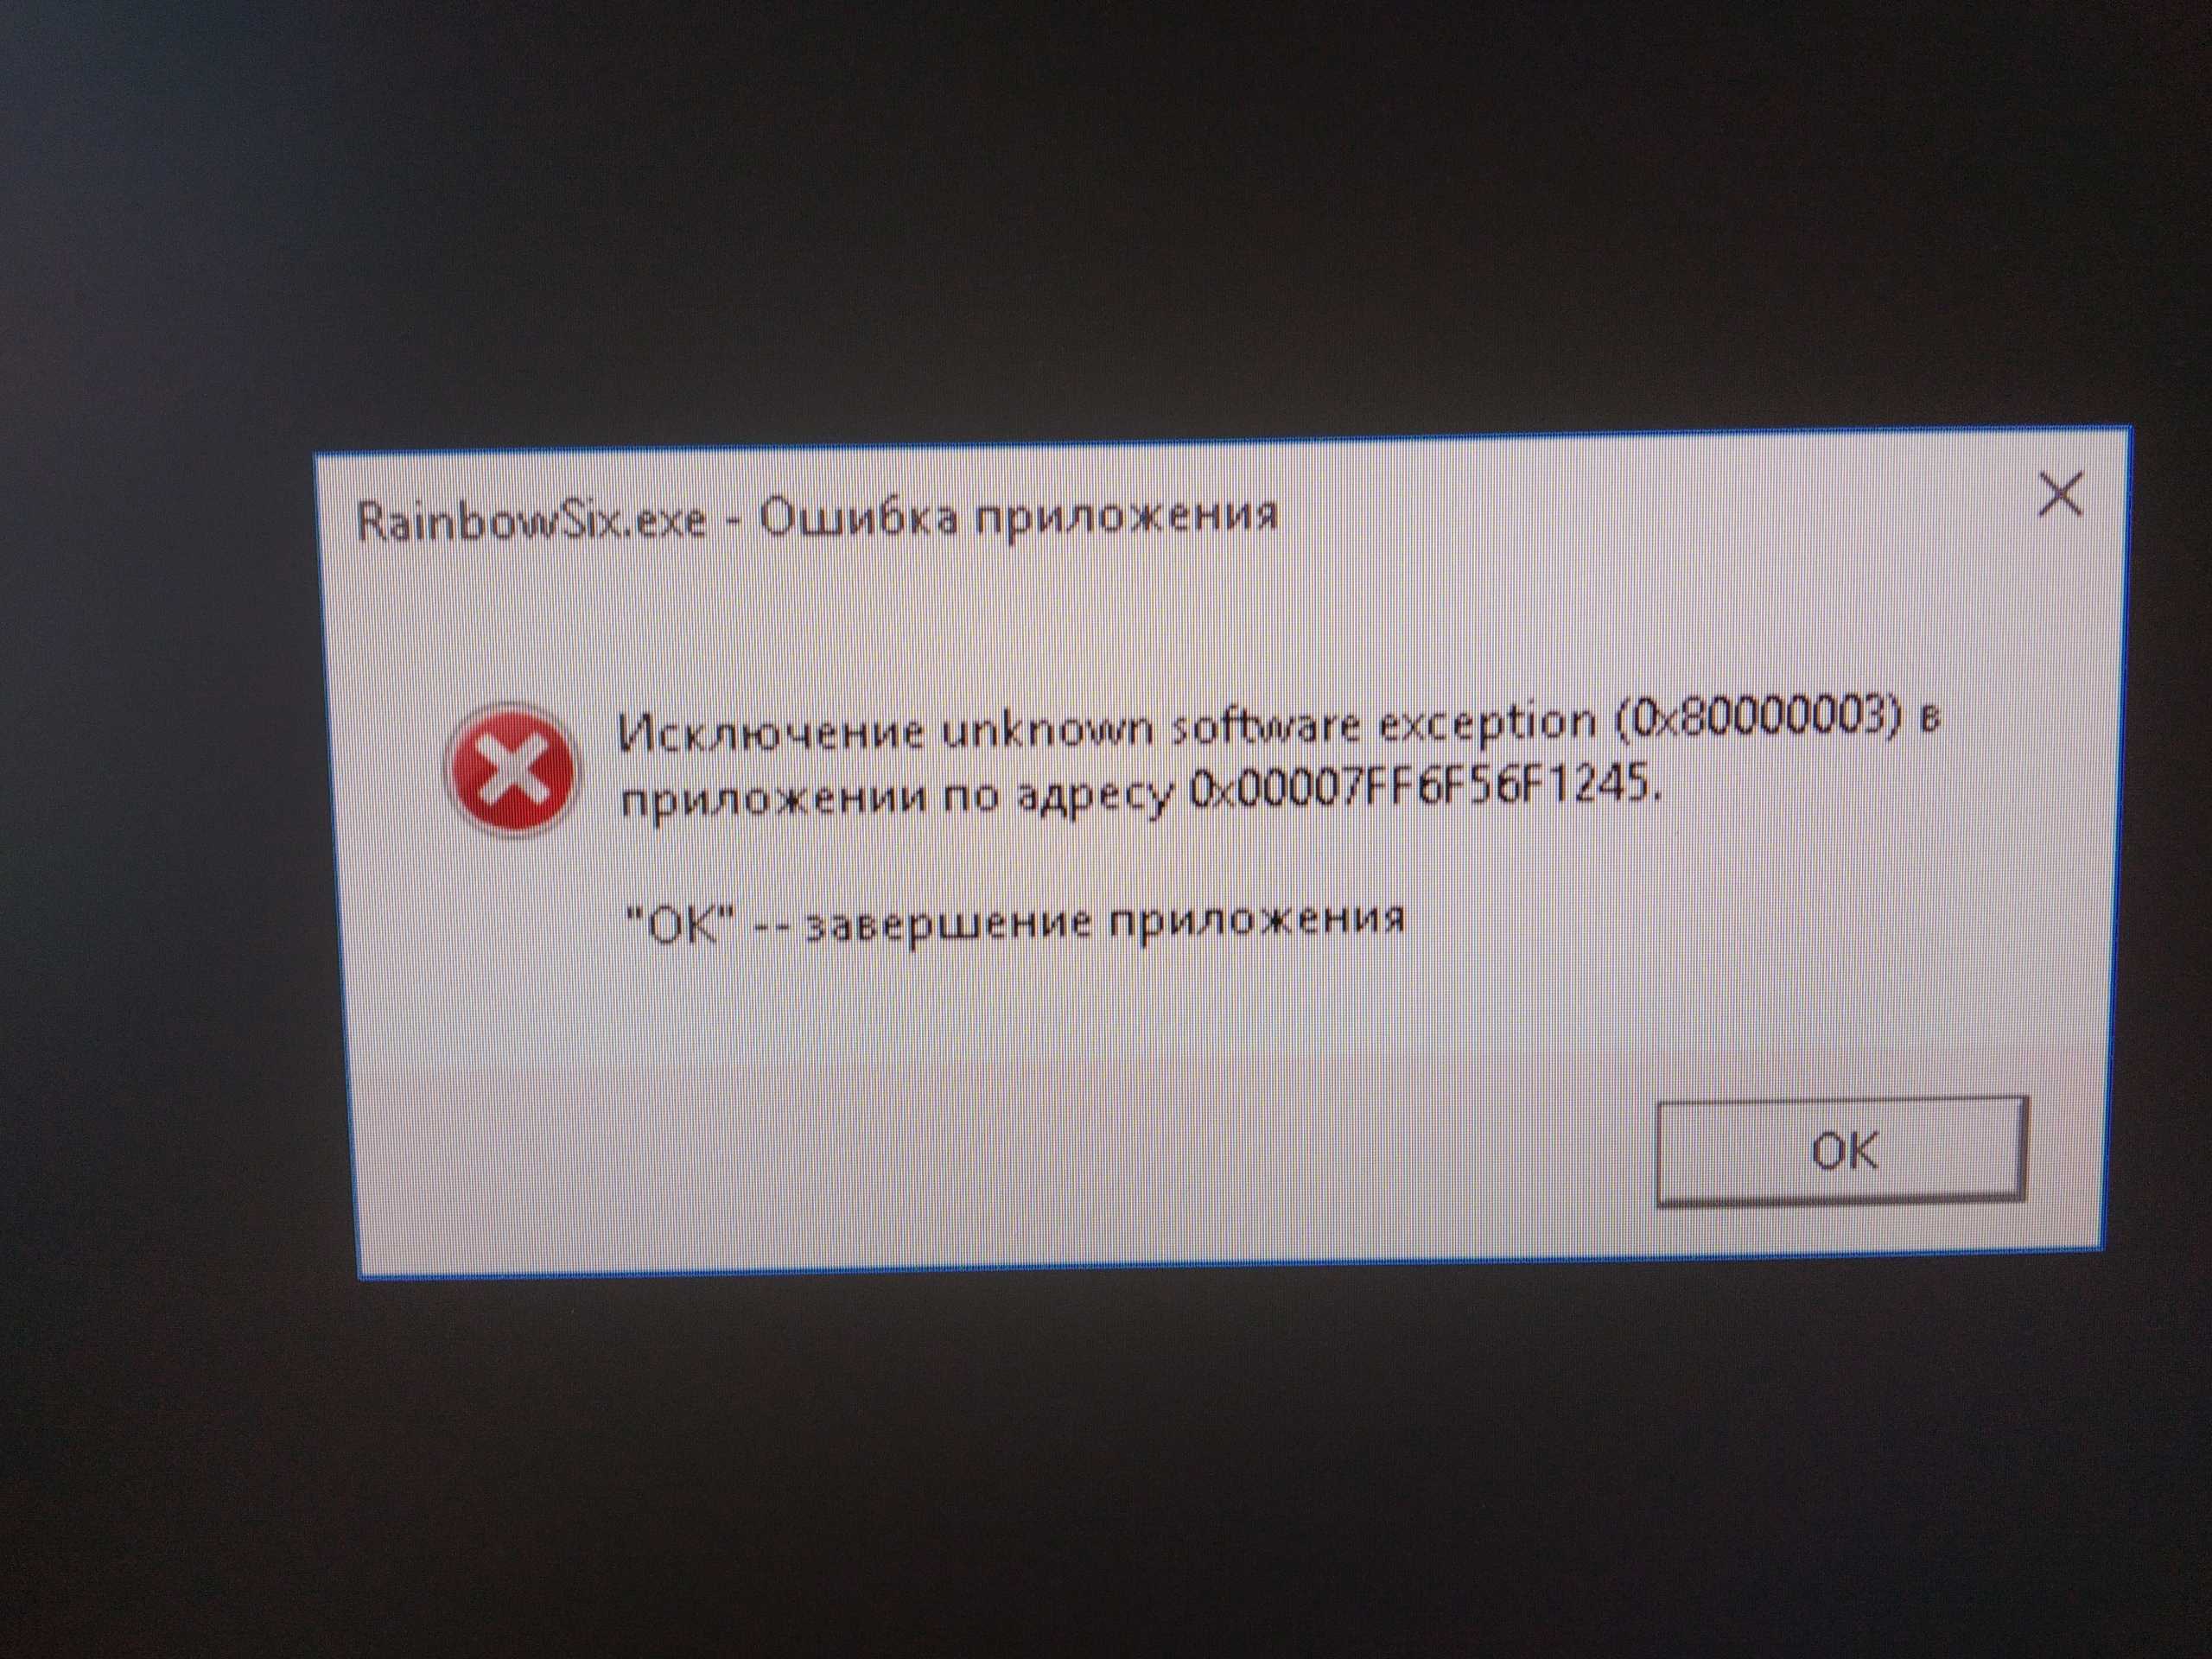 Game errors exception. Исключение Unknown software exception. Exe ошибка приложения. Исключение Unknown software exception 0x80000003 в симс 4.